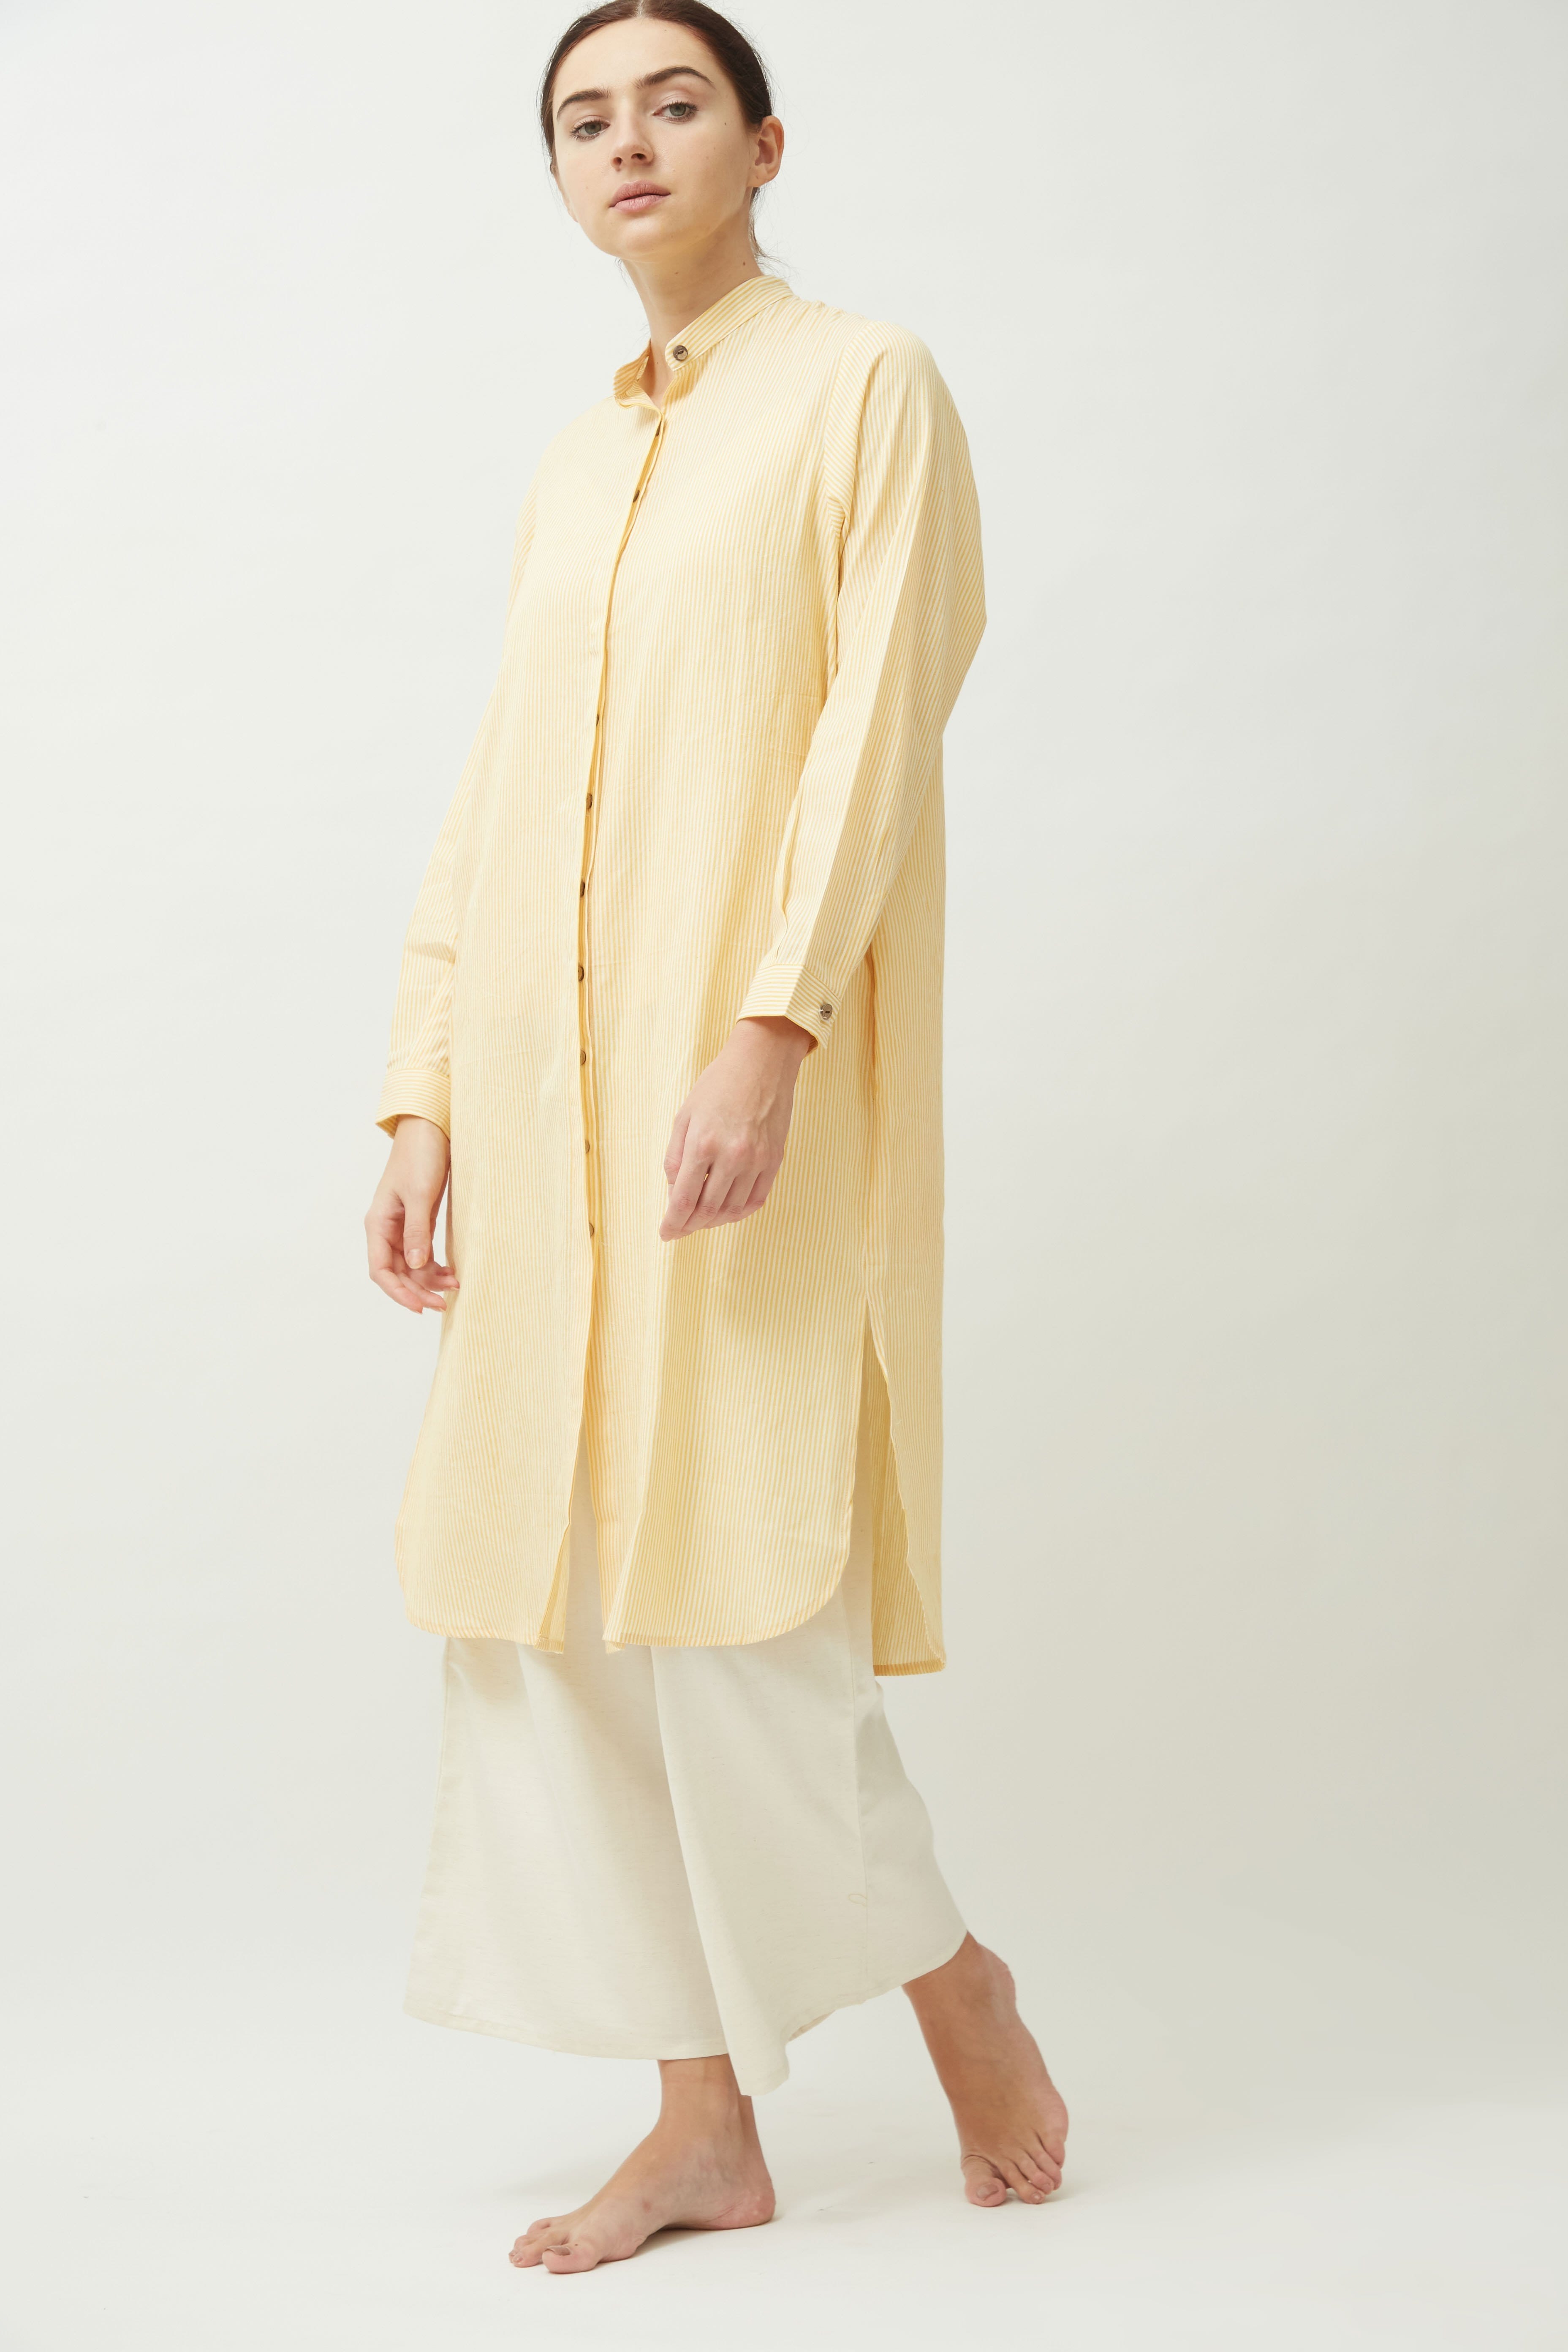 Saltpetre women's long shirt - summer pale yellow. With mandarin collared neck, deep side pockets and full sleeves. Made of 100% organic cotton